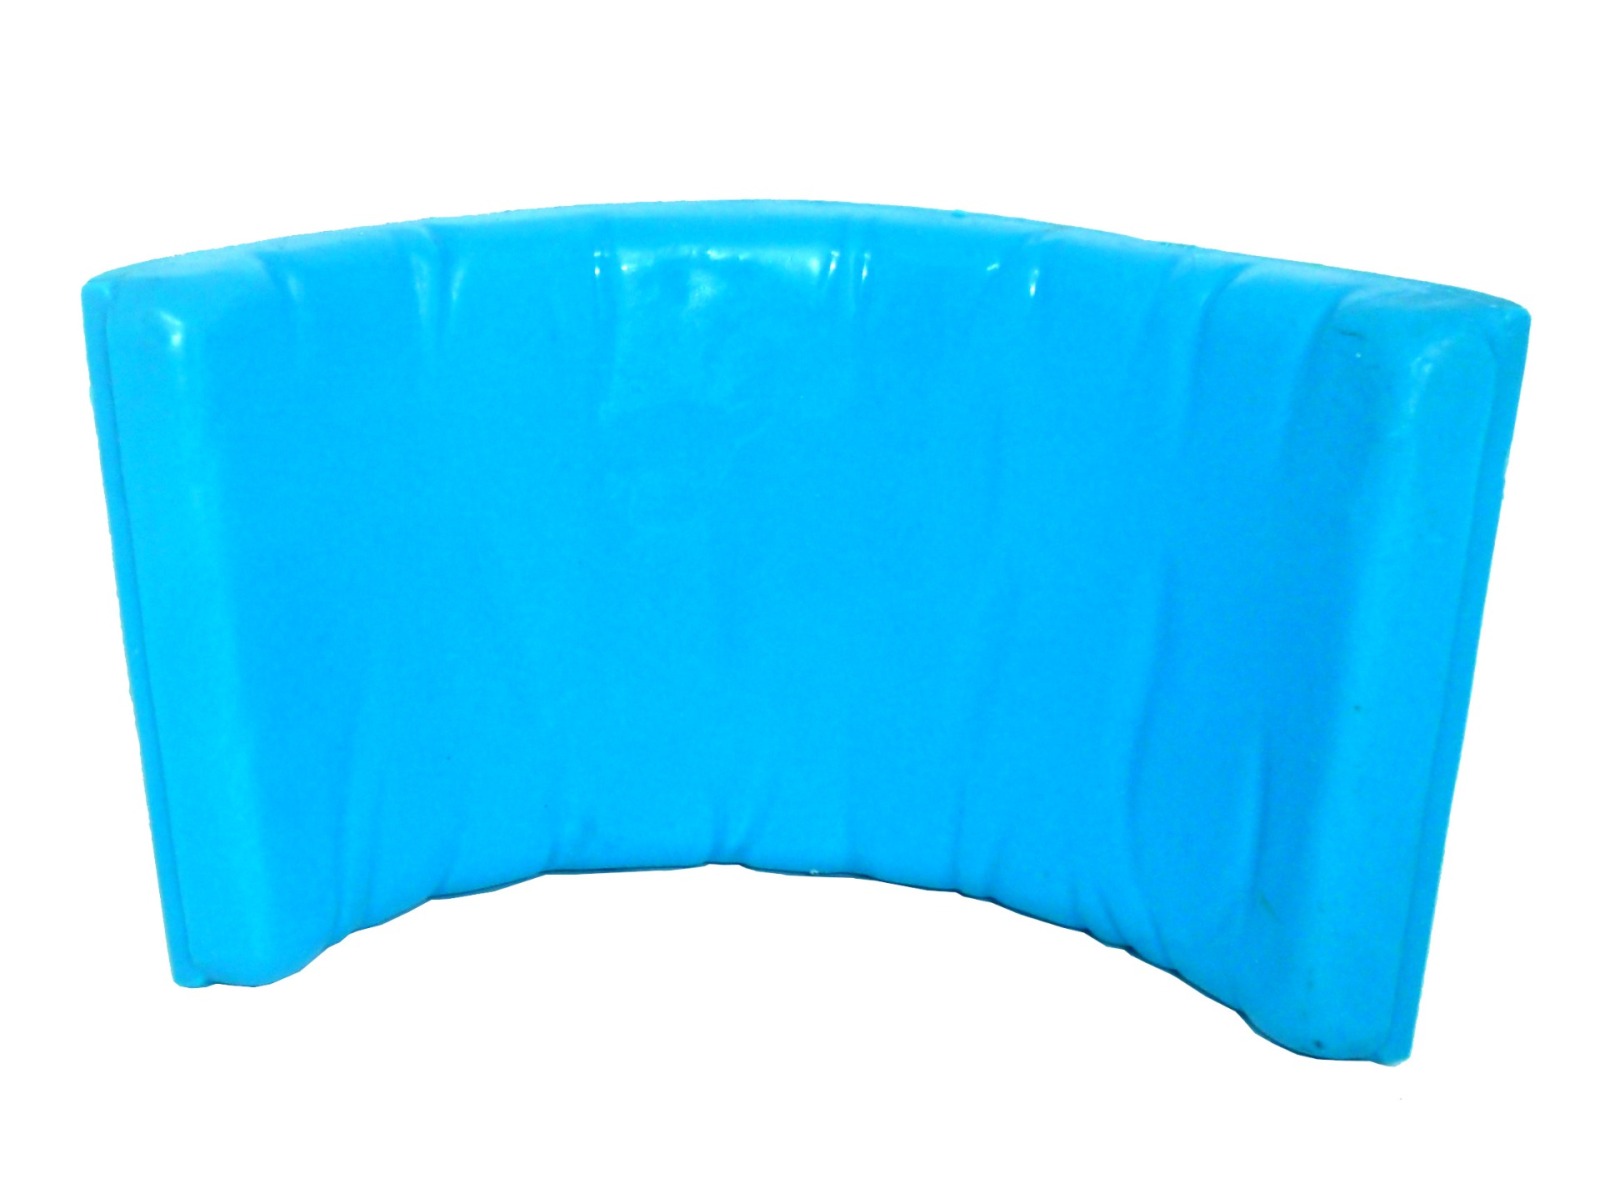 Sewer Playset Blue Bed Roll Piece - spare part 1989 Playmates